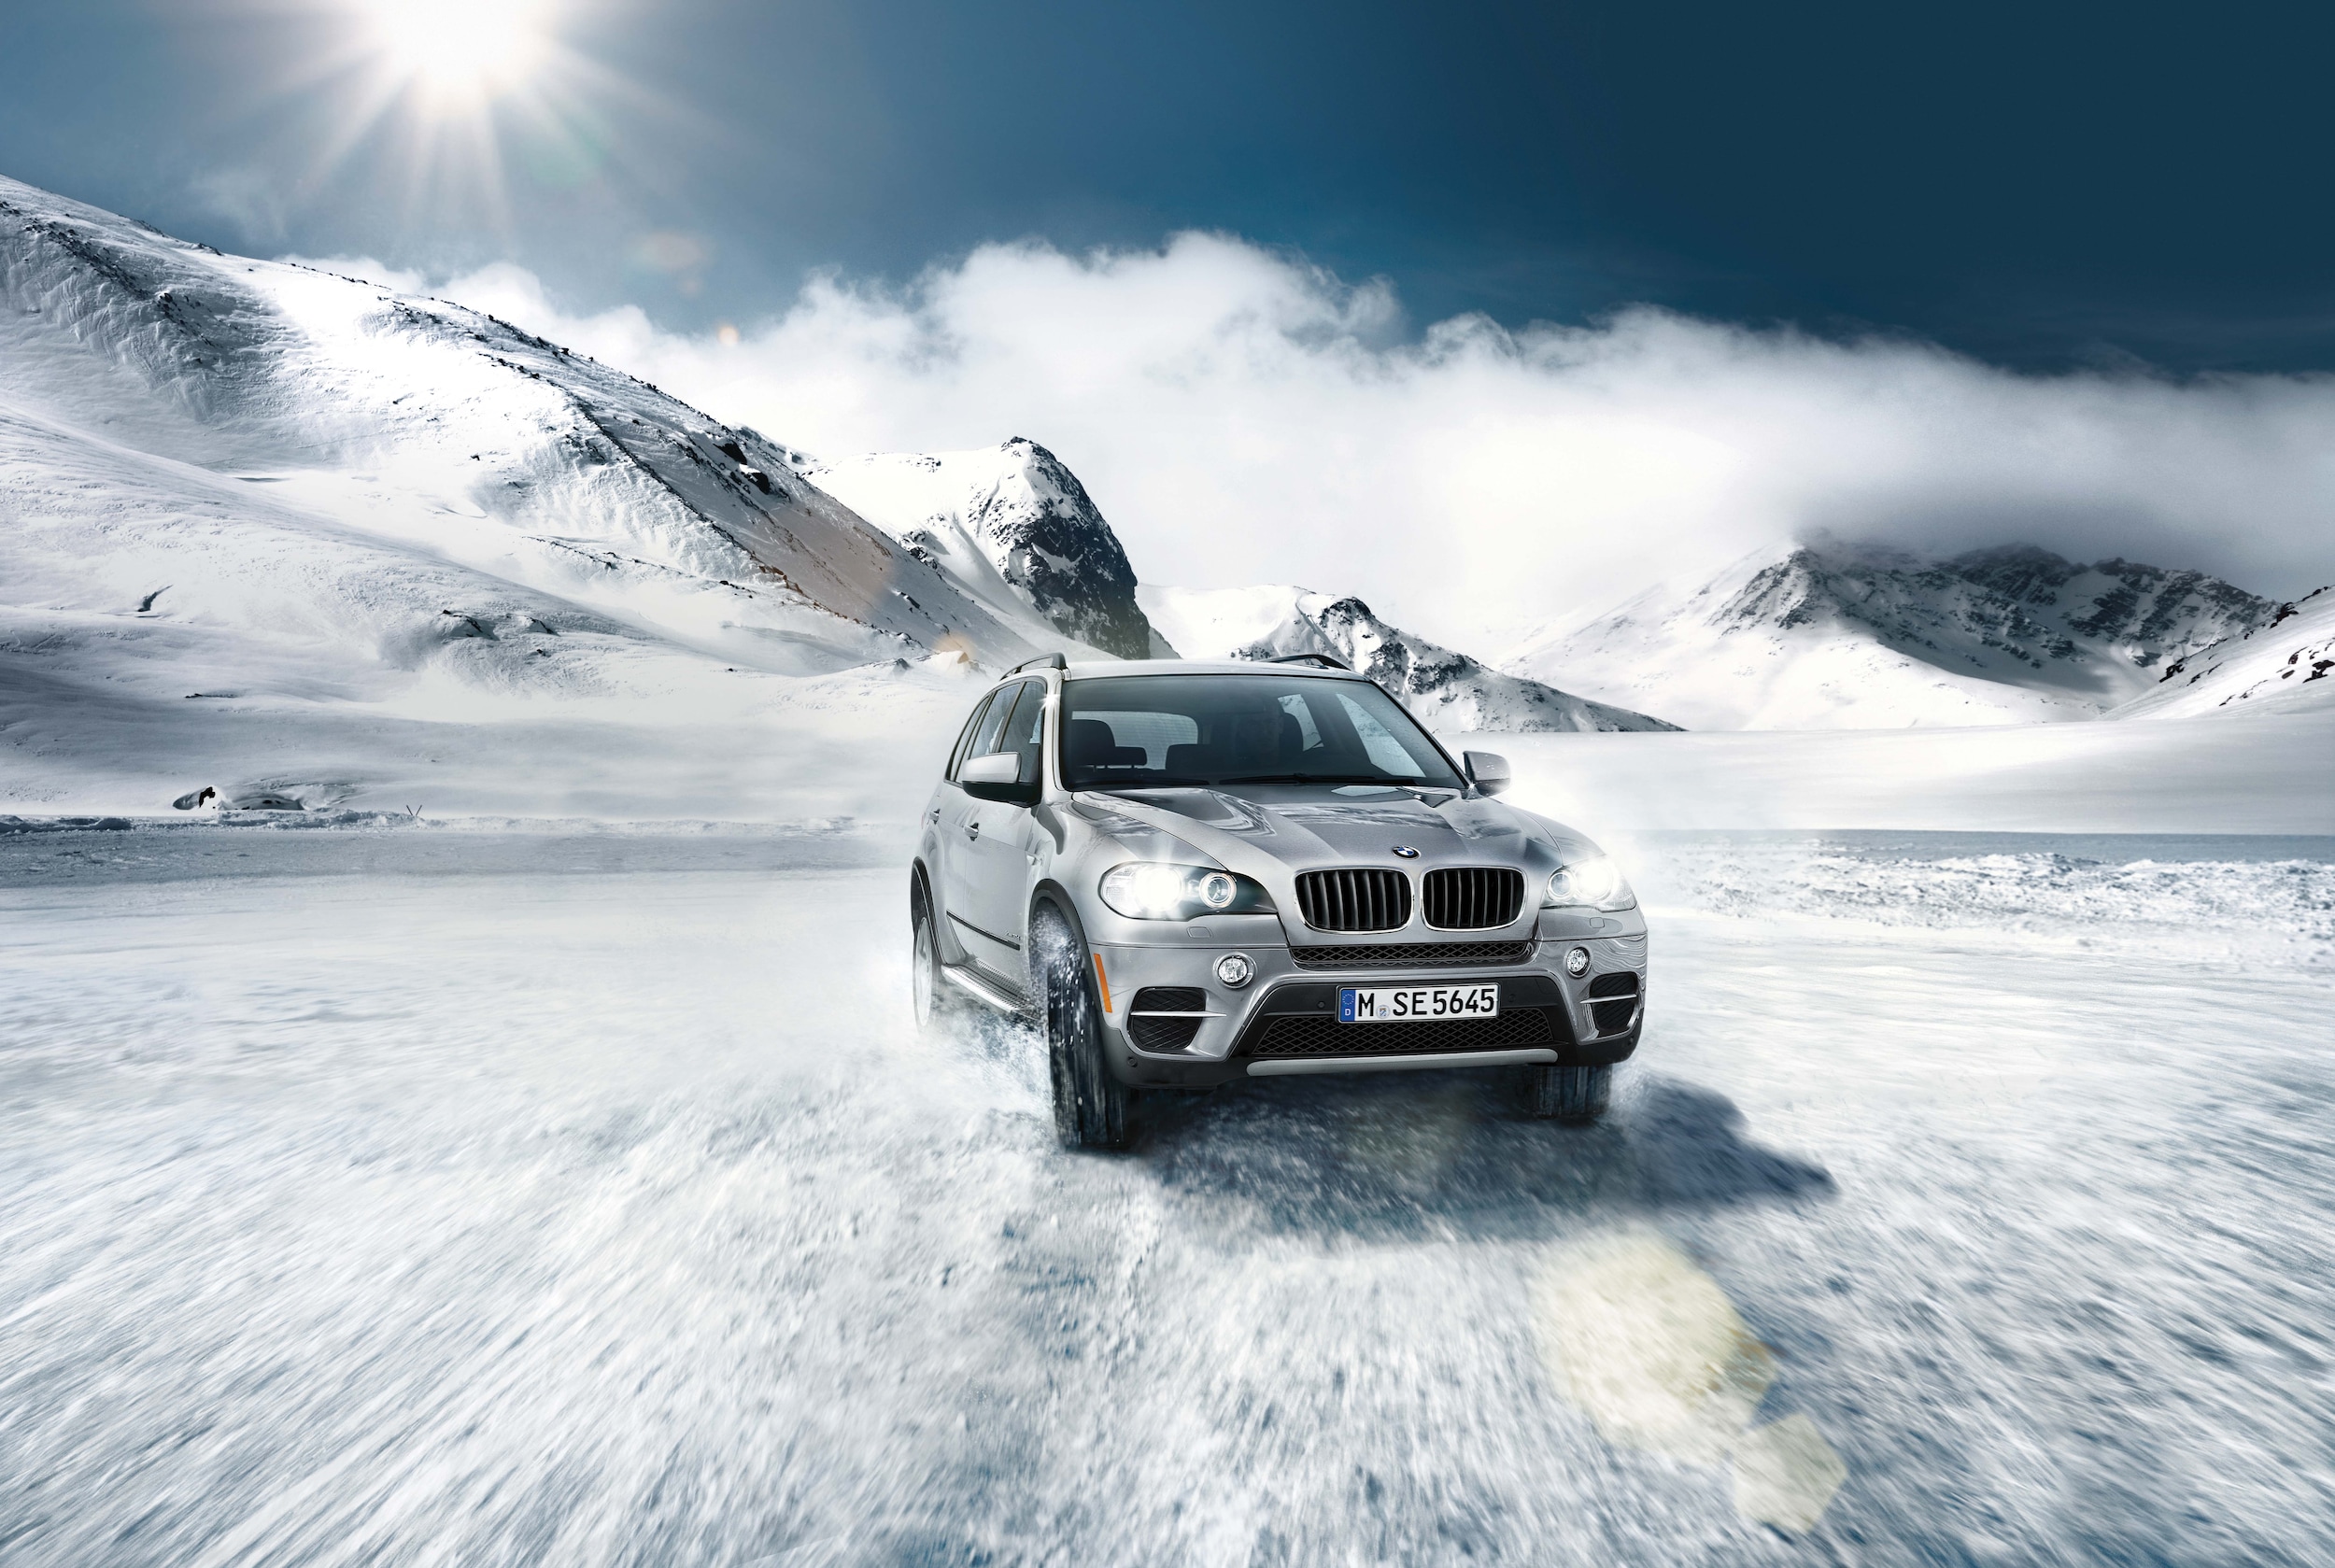 Bmw x5 snow driving tips #5